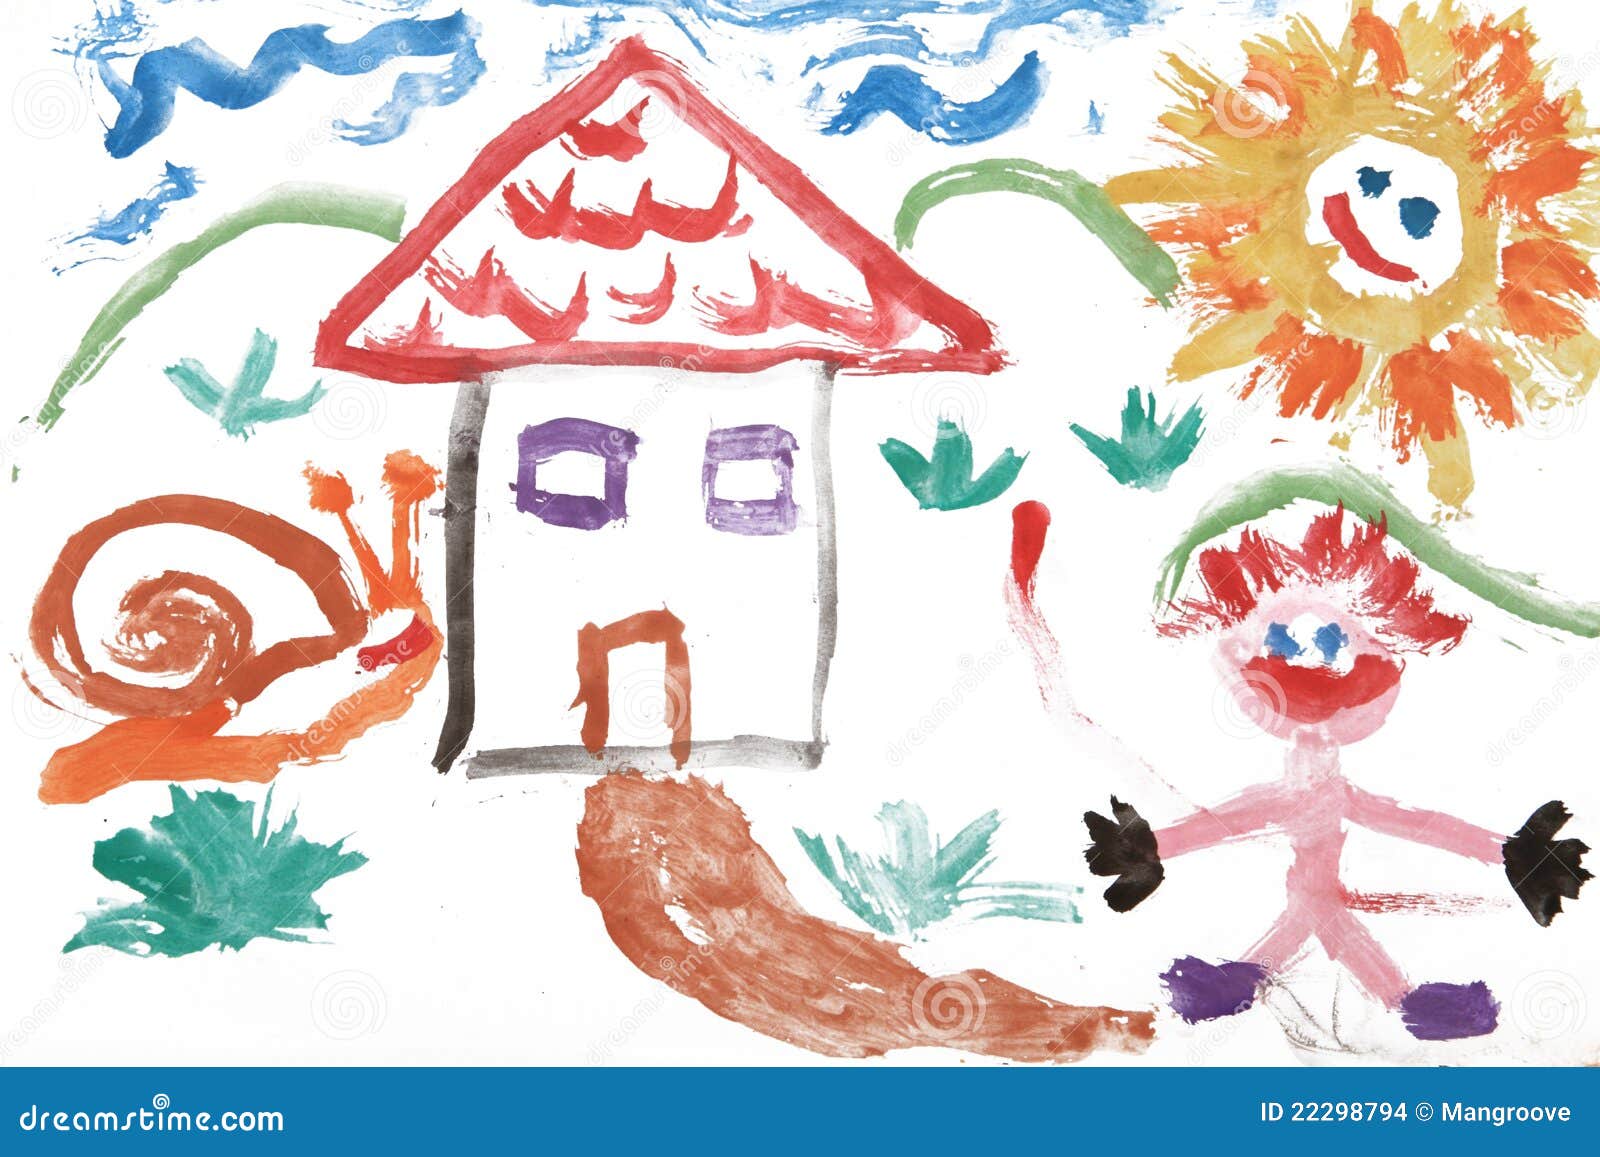 https://thumbs.dreamstime.com/z/child-kids-watercolor-drawing-house-22298794.jpg